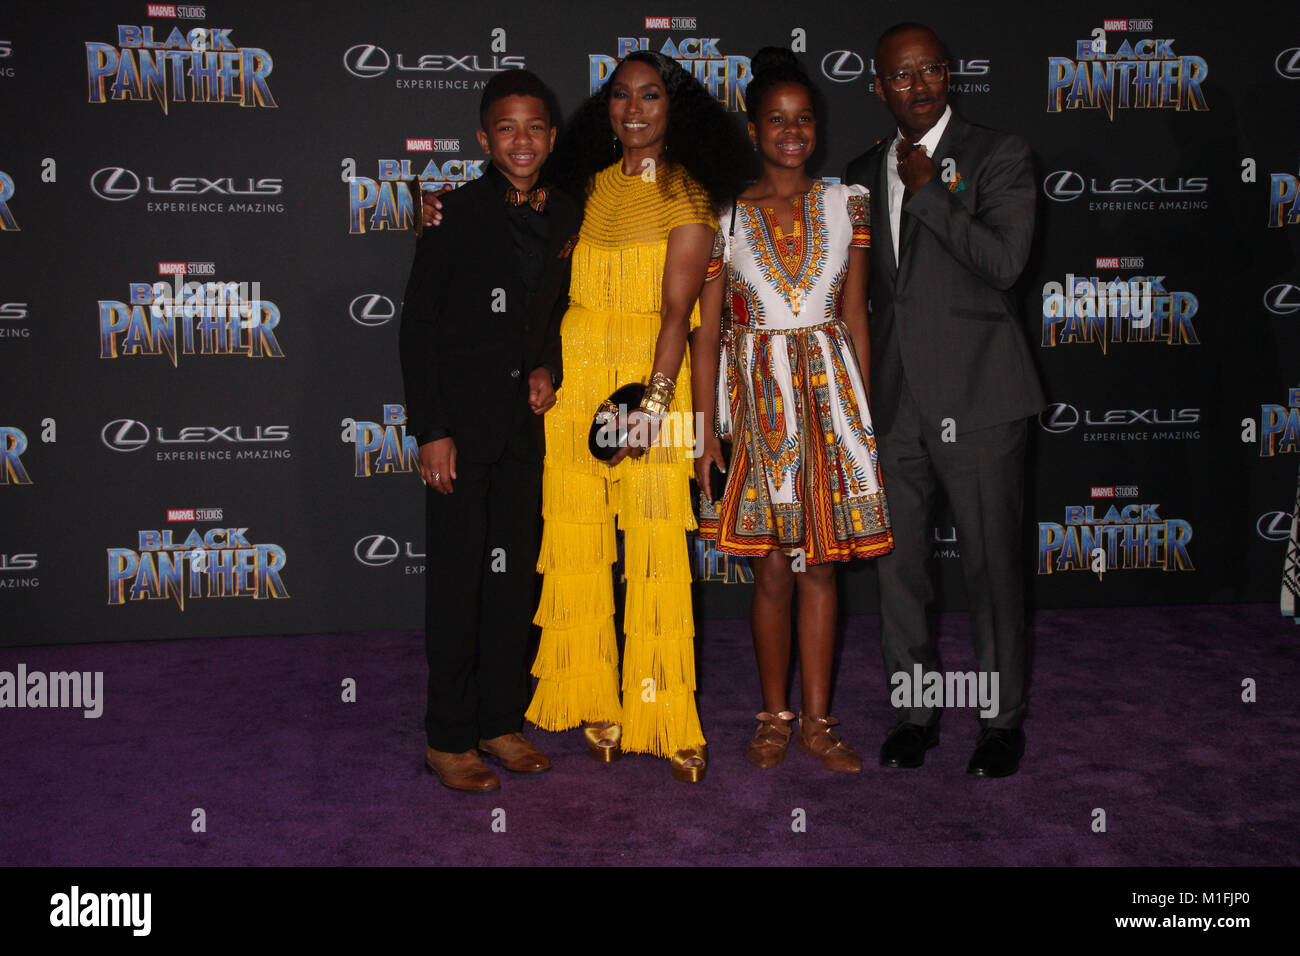 Slater Vance, Angela Bassett, Bronwyn Vance,  Courtney B. Vance  01/29/2018 The World Premiere of 'Black Panther' held at The Dolby Theatre in Los Angeles, CA  Photo: Cronos/Hollywood News Stock Photo